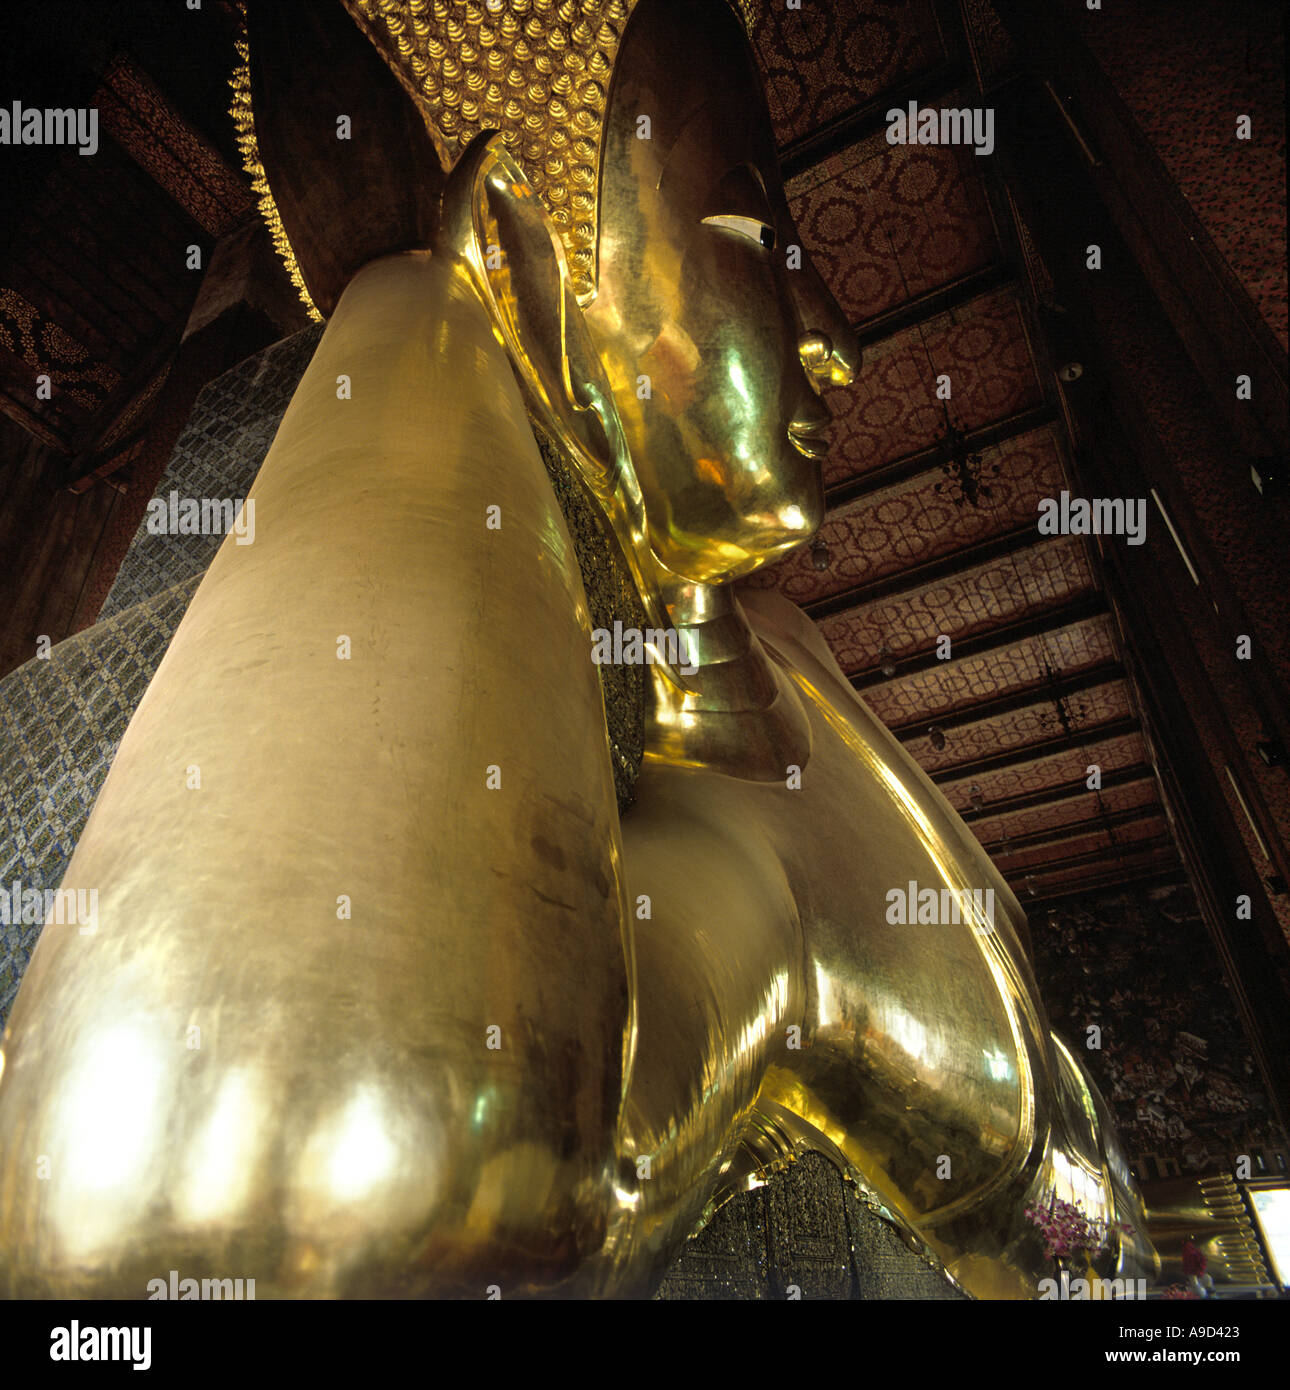 Statue of the Reclining Buddha, Wat Pho (Temple of the Reclining Buddha), Bangkok, Thailand Stock Photo